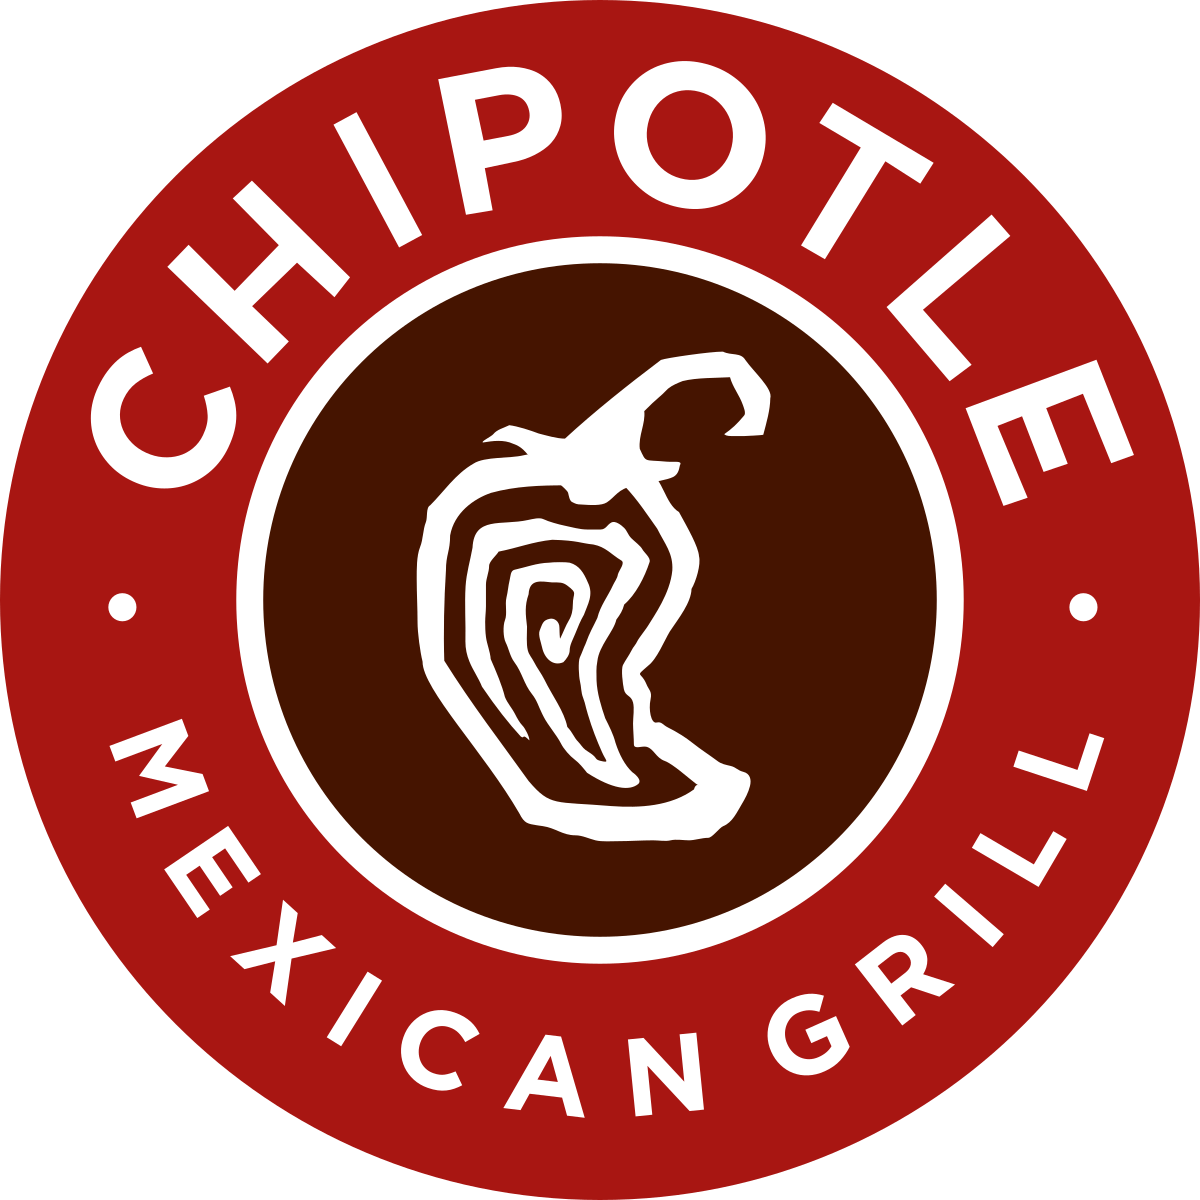 Chipotle Mexican Grill Logo - Chipotle Mexican Grill